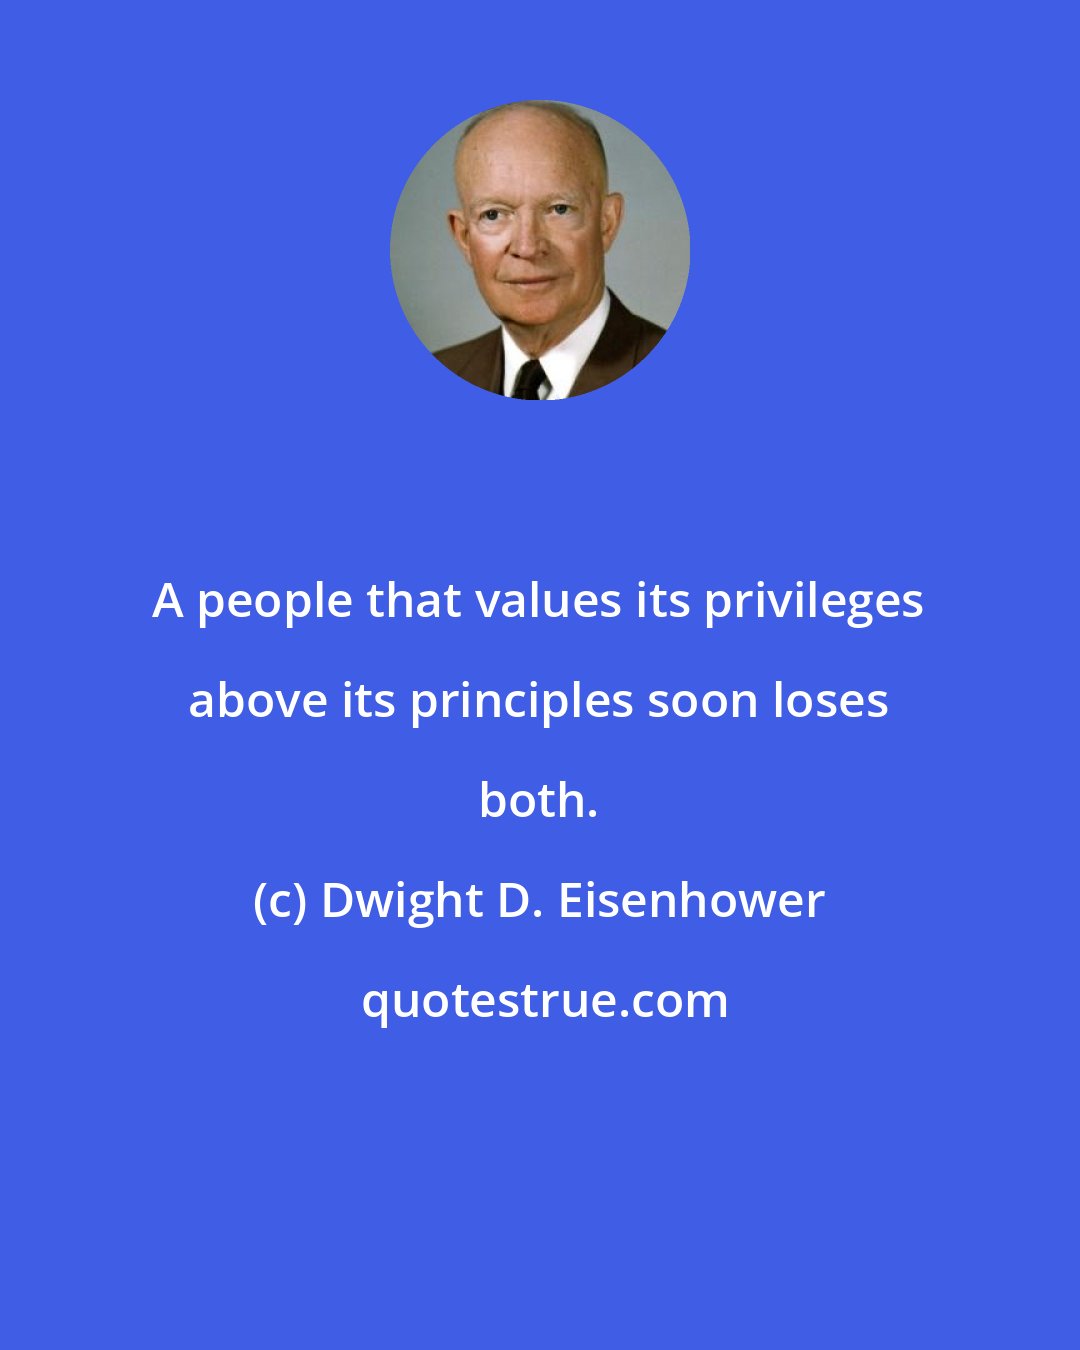 Dwight D. Eisenhower: A people that values its privileges above its principles soon loses both.